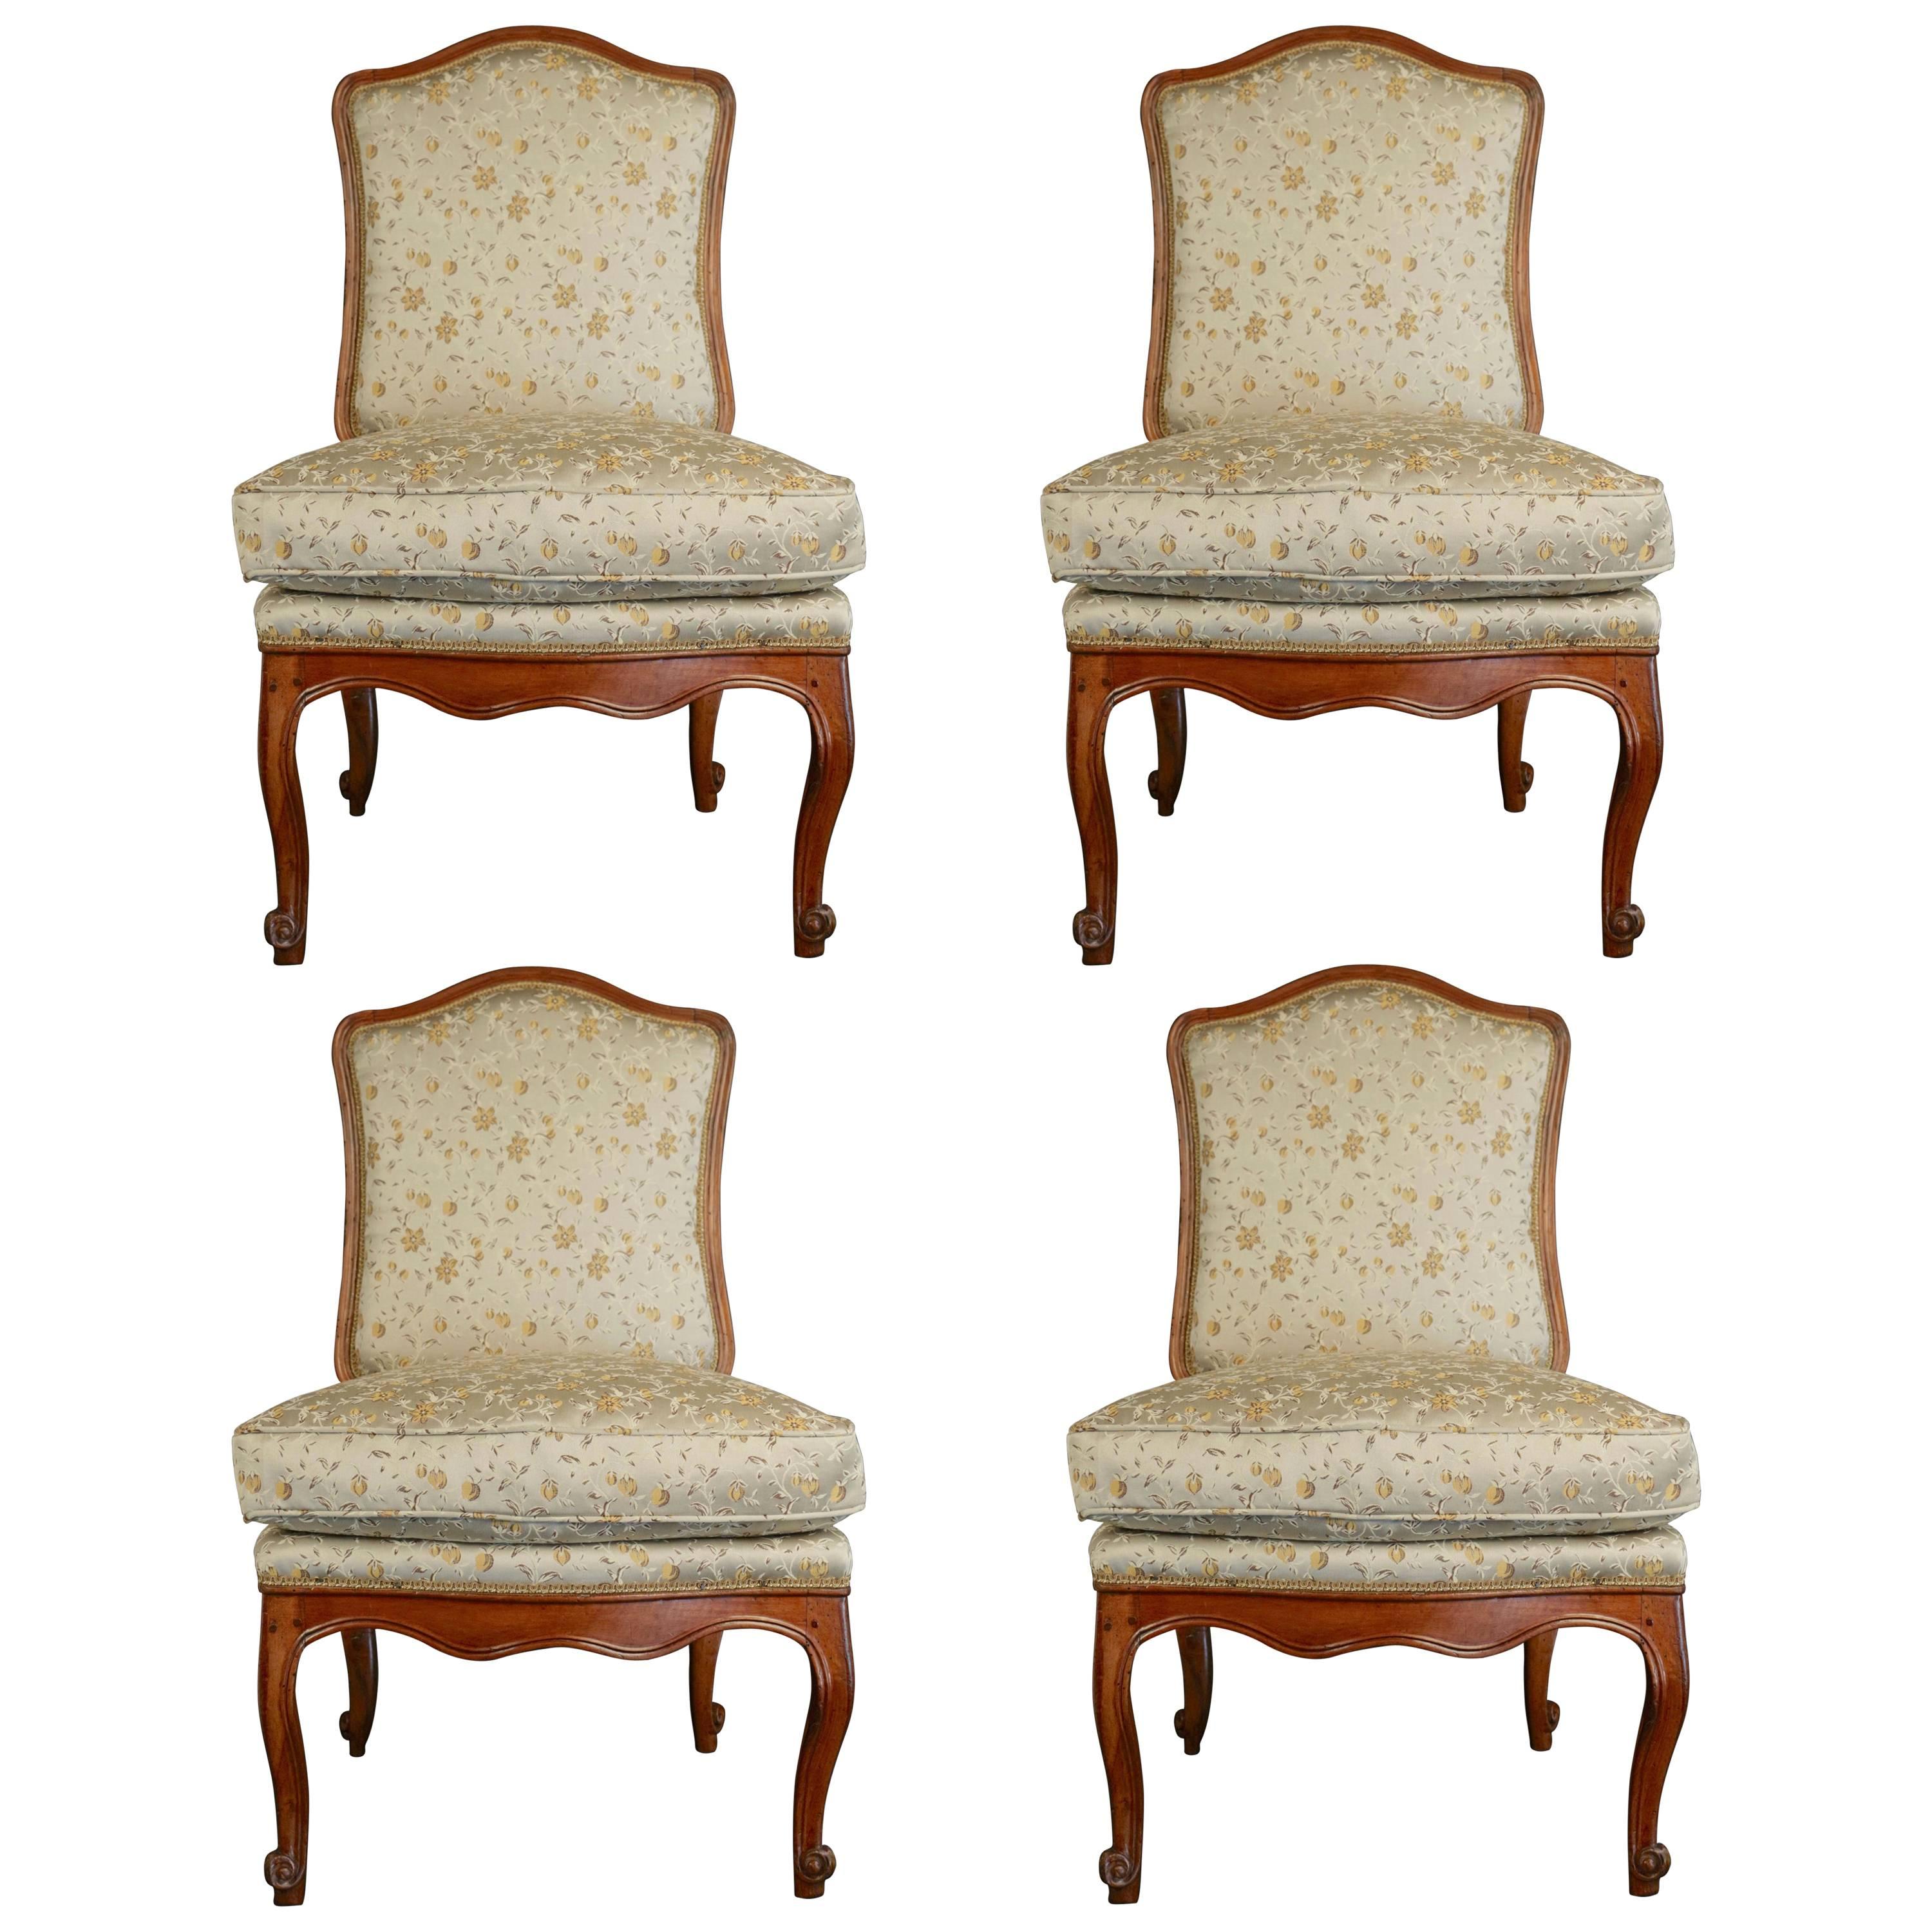 French Four Regence Period Slipper Chairs in Walnut, circa 1730 For Sale